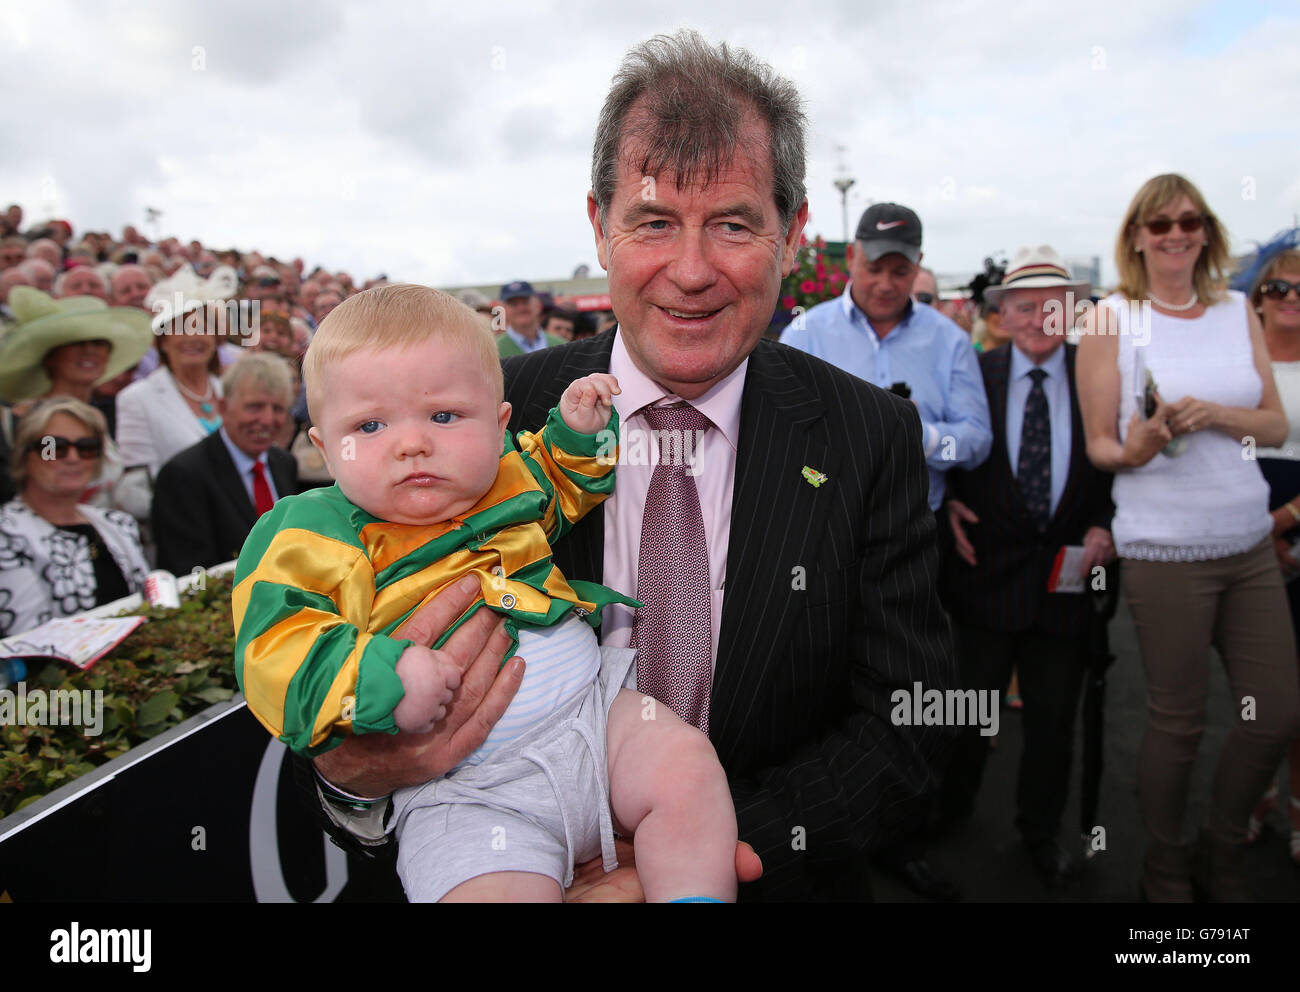 JP McManus celebrates with 6 month old Conor Jordan from Navan after Thomas  Edison's victory in The Guinness Galway Hurdle Handicap on day four of the  Galway Festival at Galway Racecourse, Ireland